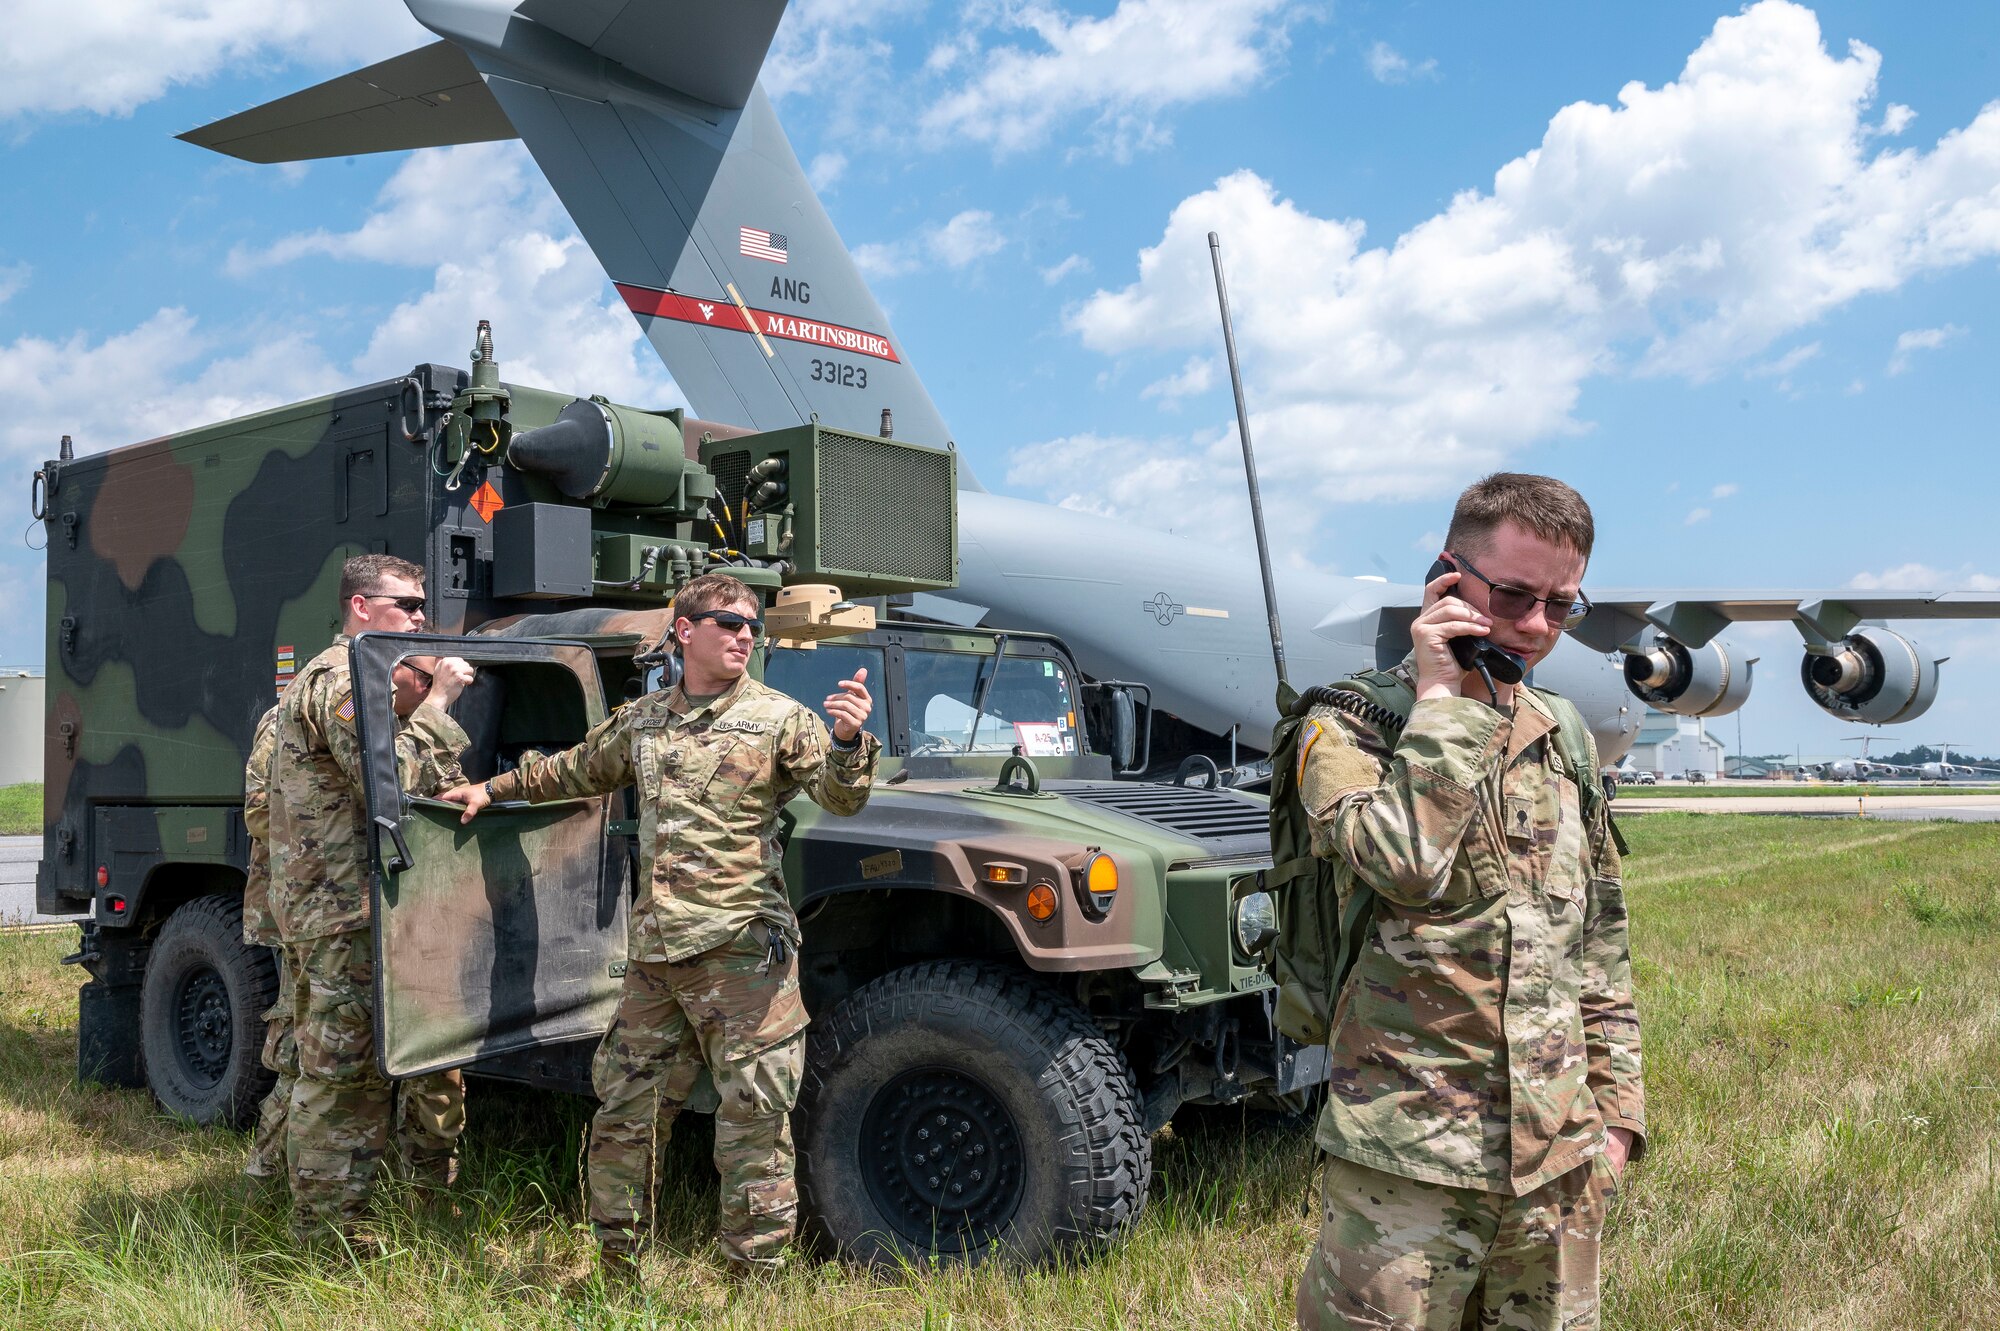 North Carolina National Guard Soldiers with 5th Battalion, 113th Field Artillery, maintain communications during a High Mobility Artillery Rocket System (HIMARS) training event as part of a readiness exercise for the 167th Airlift Wing, Shepherd Field, Martinsburg, West Virginia.